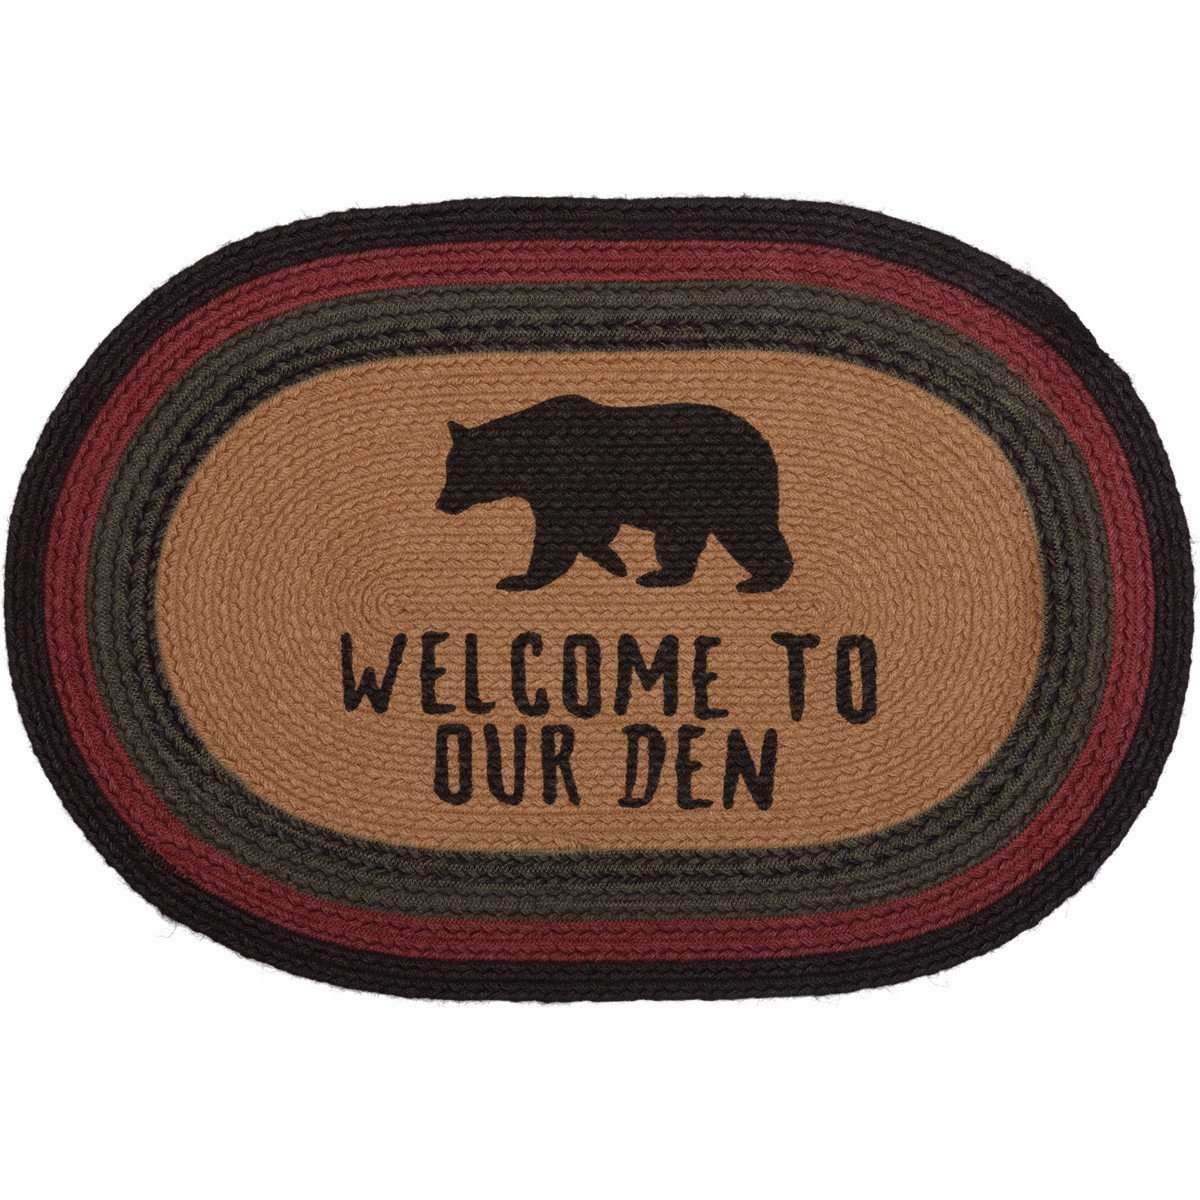 Wyatt Stenciled Bear Jute Braided Rug Oval/Rect rugs VHC Brands 20x30 oval Welcome to our Den 